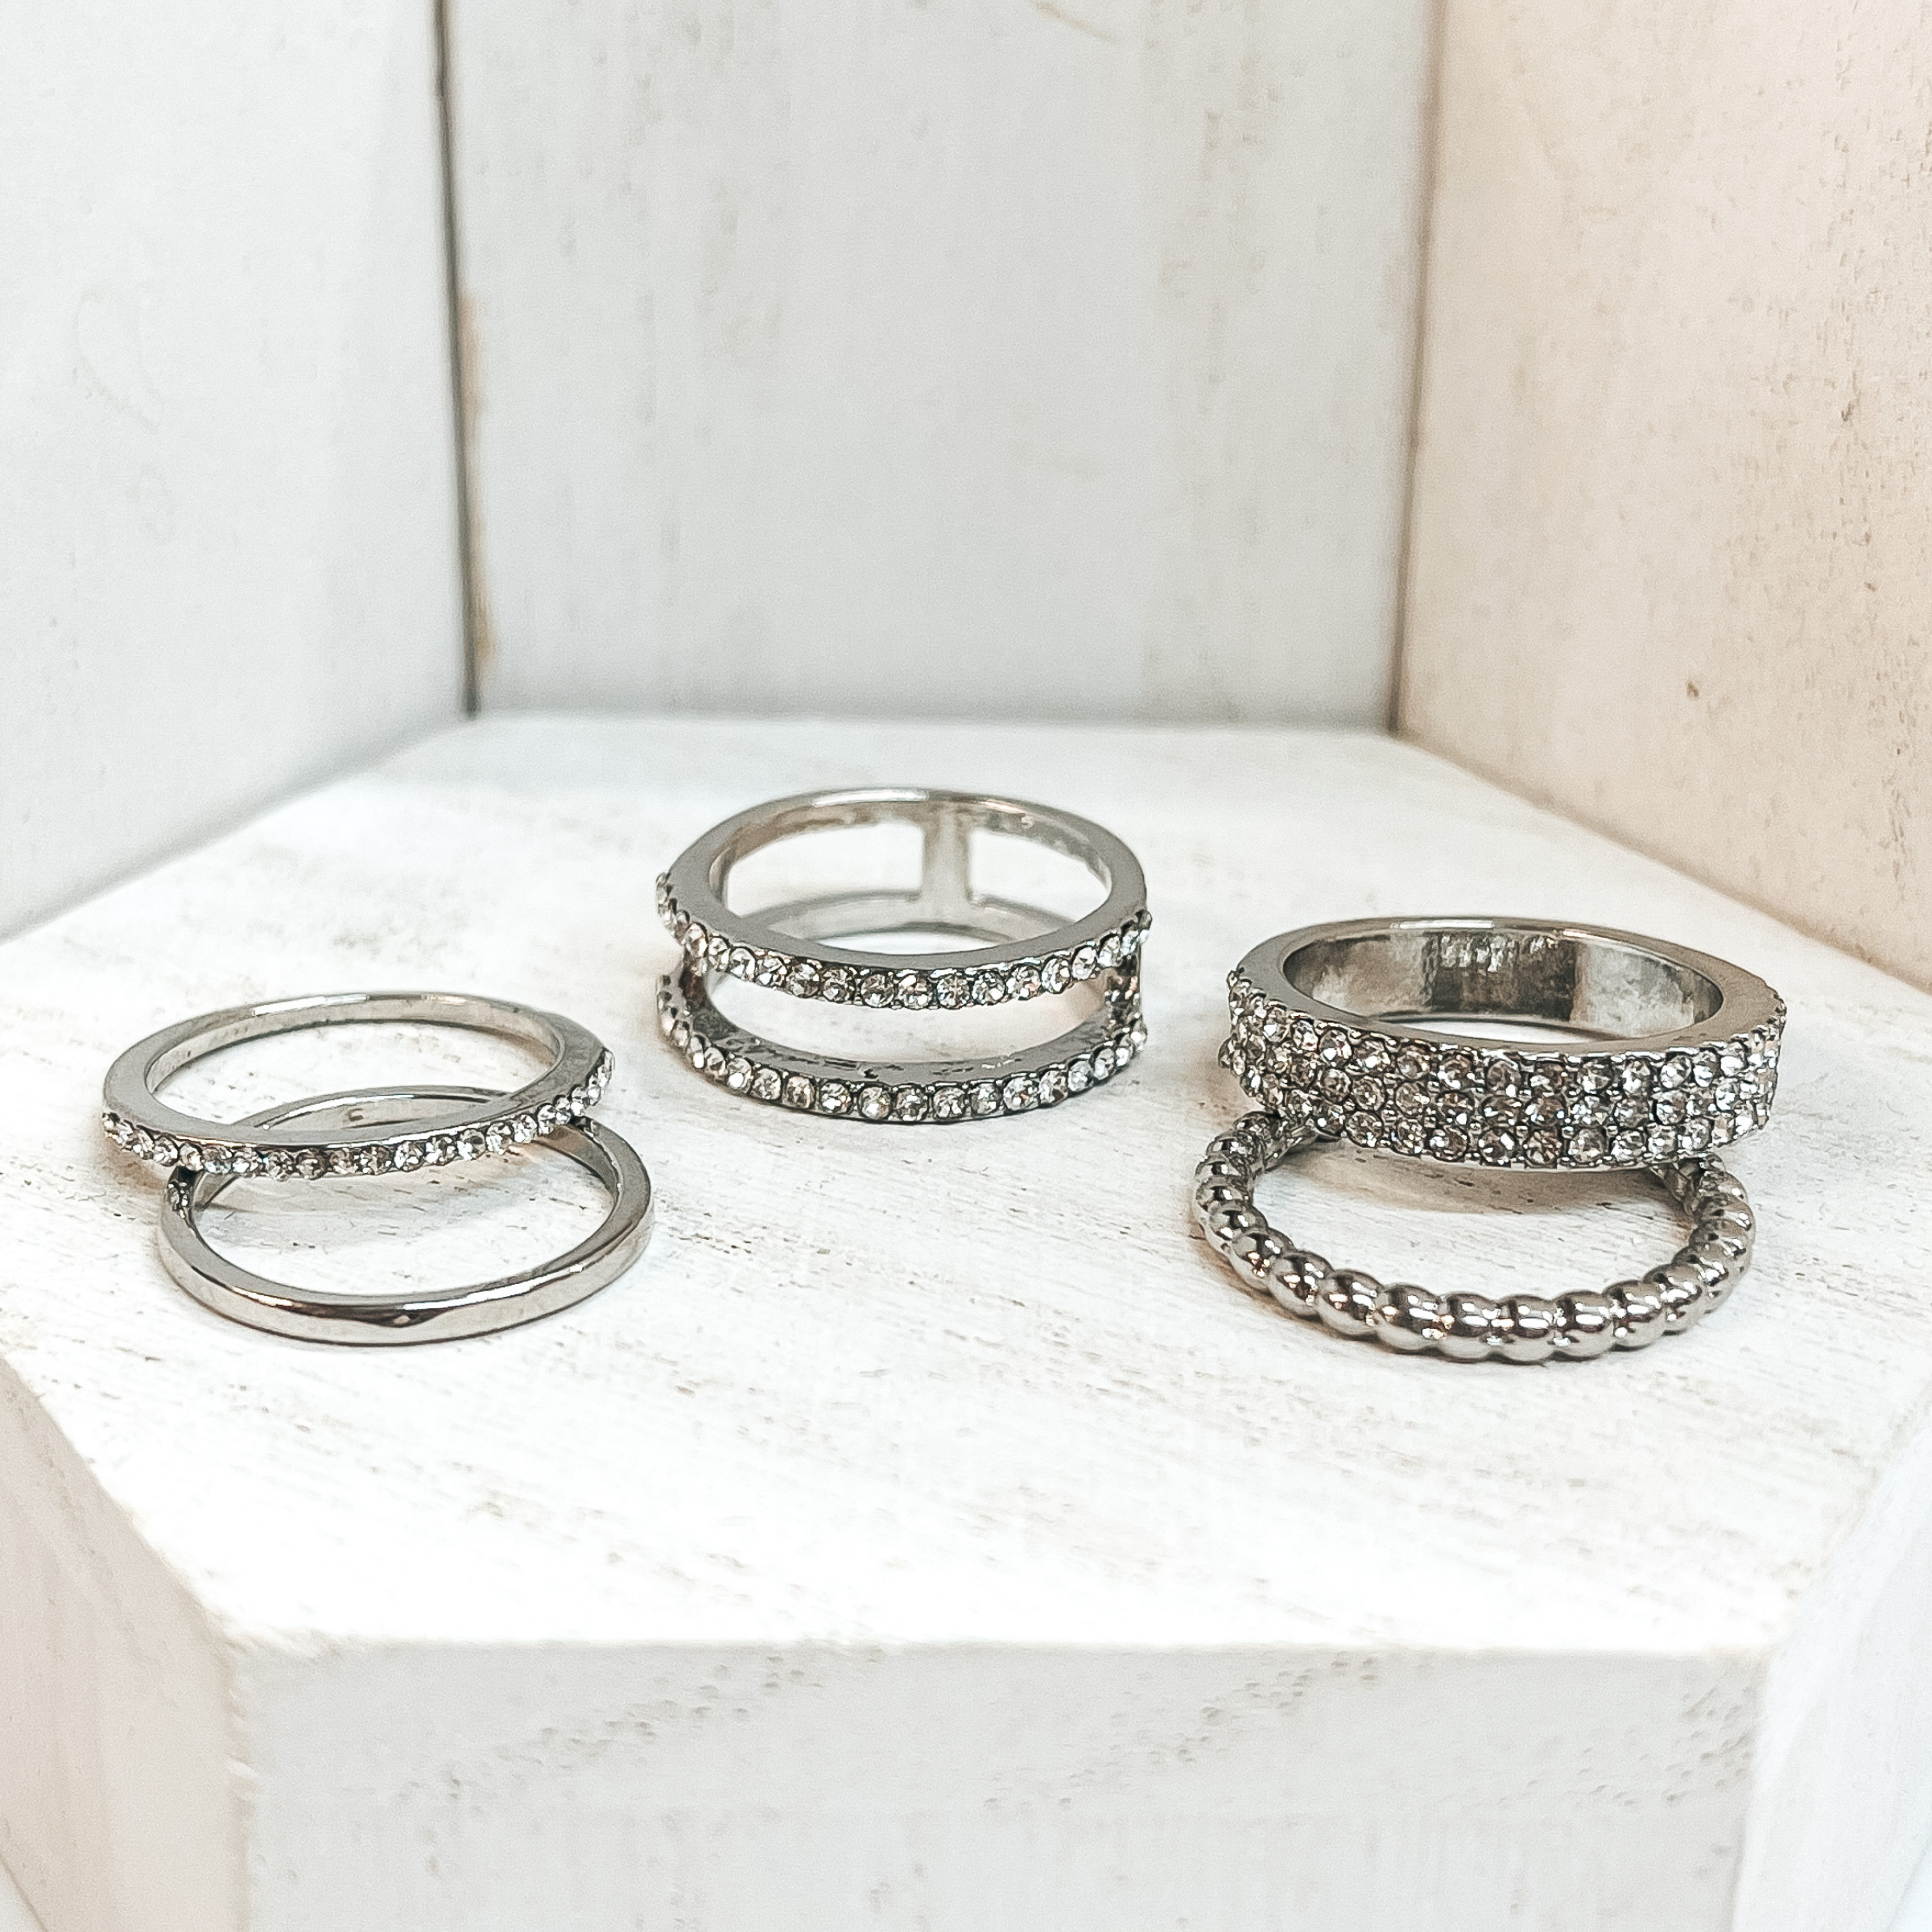 This is a set of five silver rings. All of them but  two rings have crystals in different varieties on  them. One of the rings is bubbled textured and the  other is a solid band. These rings are pictured on a white block and  white background.